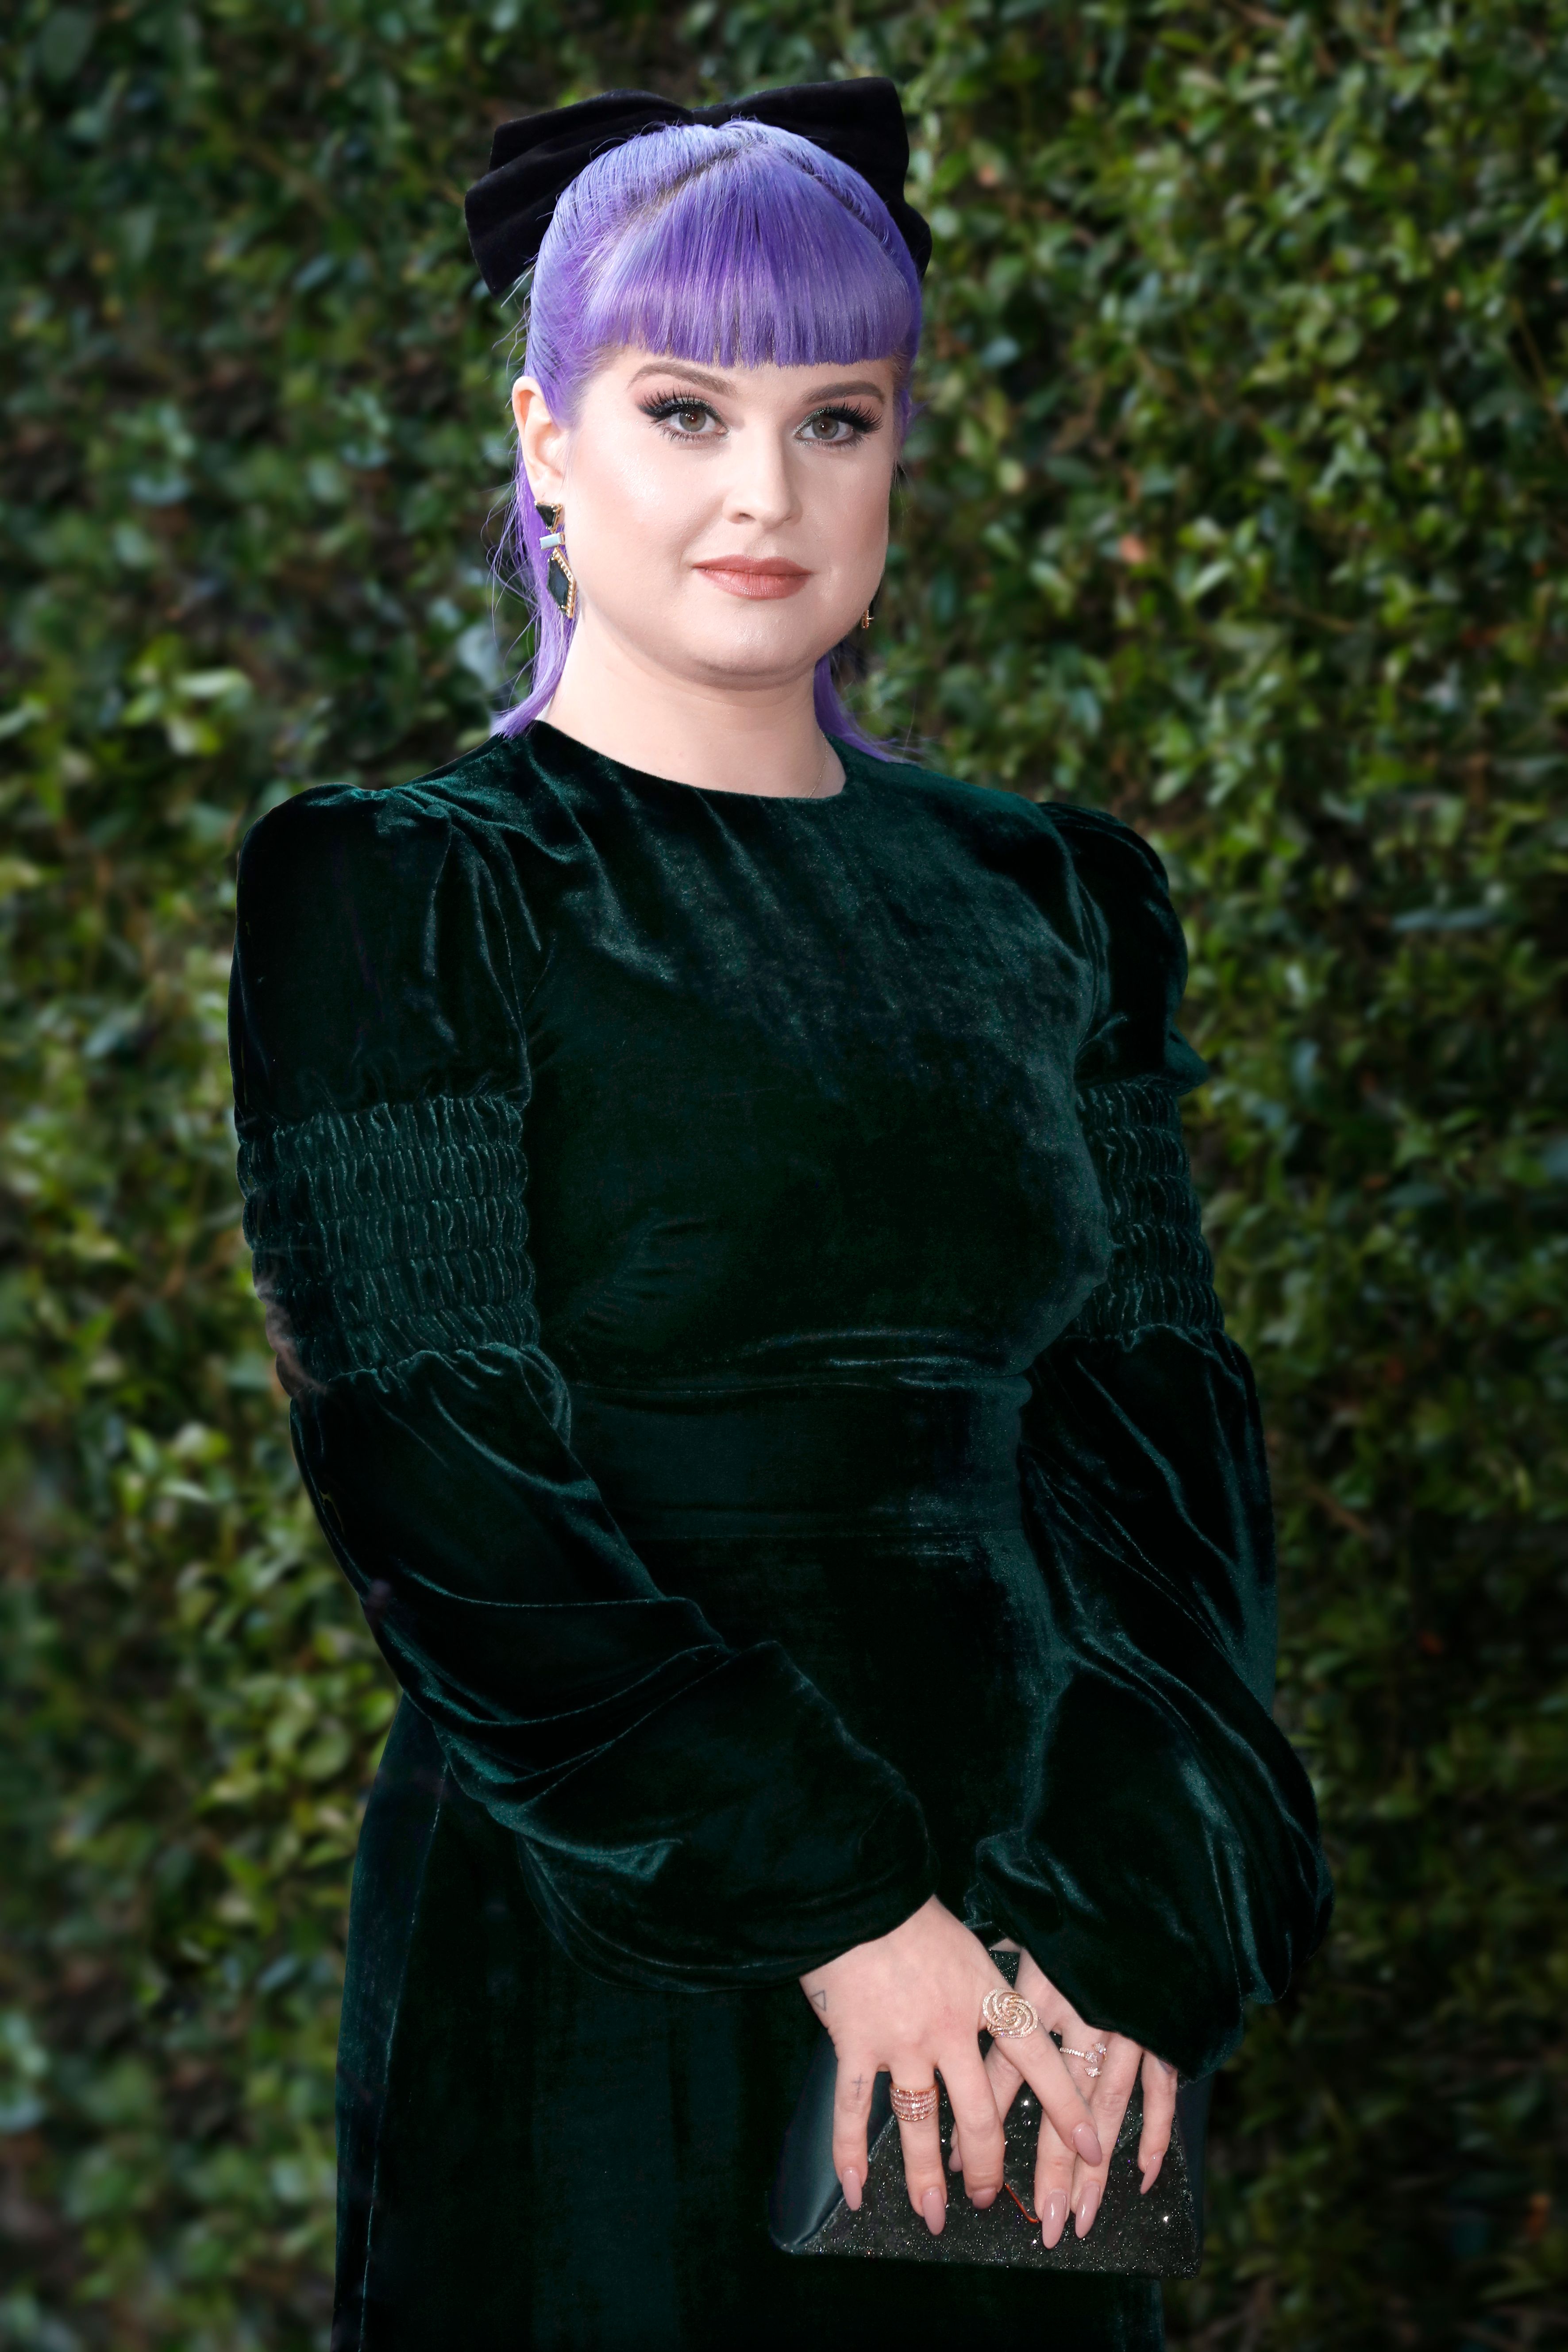 Kelly Osbourne during the 2019 American Music Awards at the Microsoft Theater on November 24, 2019 in Los Angeles, California. | Source: Getty Images